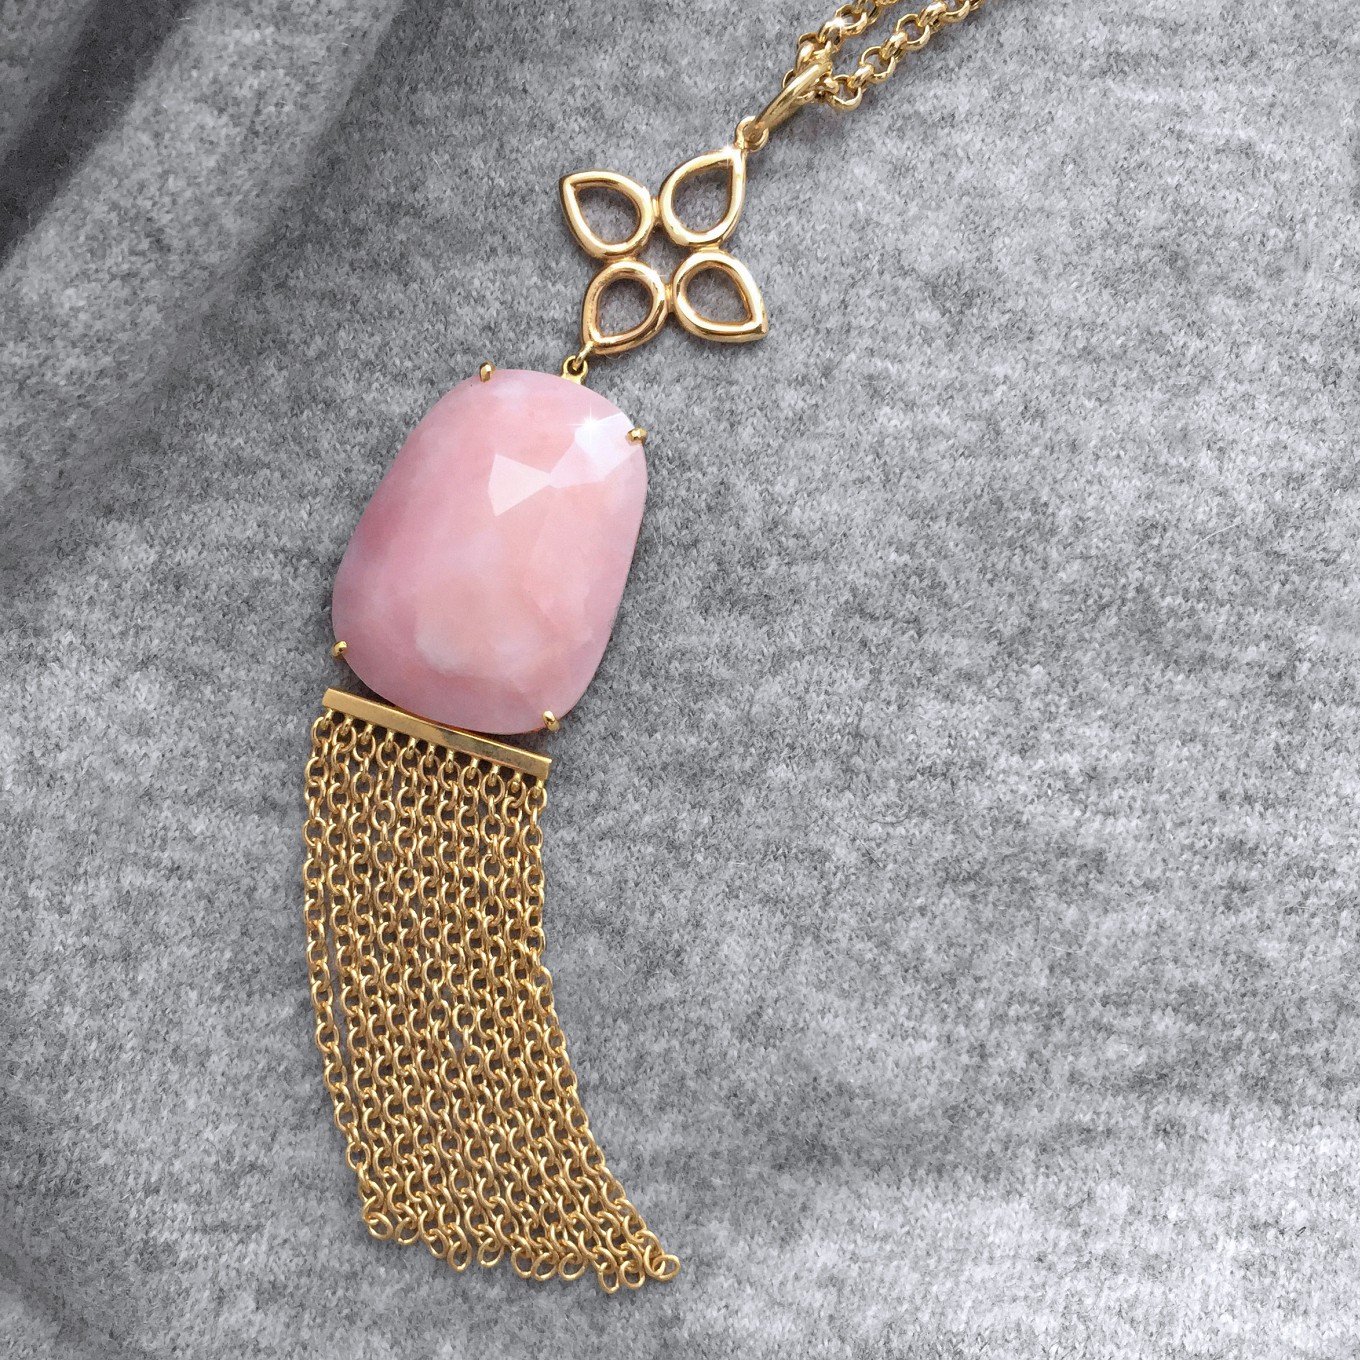 PINK OPAL TASSEL PENDANT IN YELLOW GOLD SHOWN ON YELLOW GOLD CHAIN